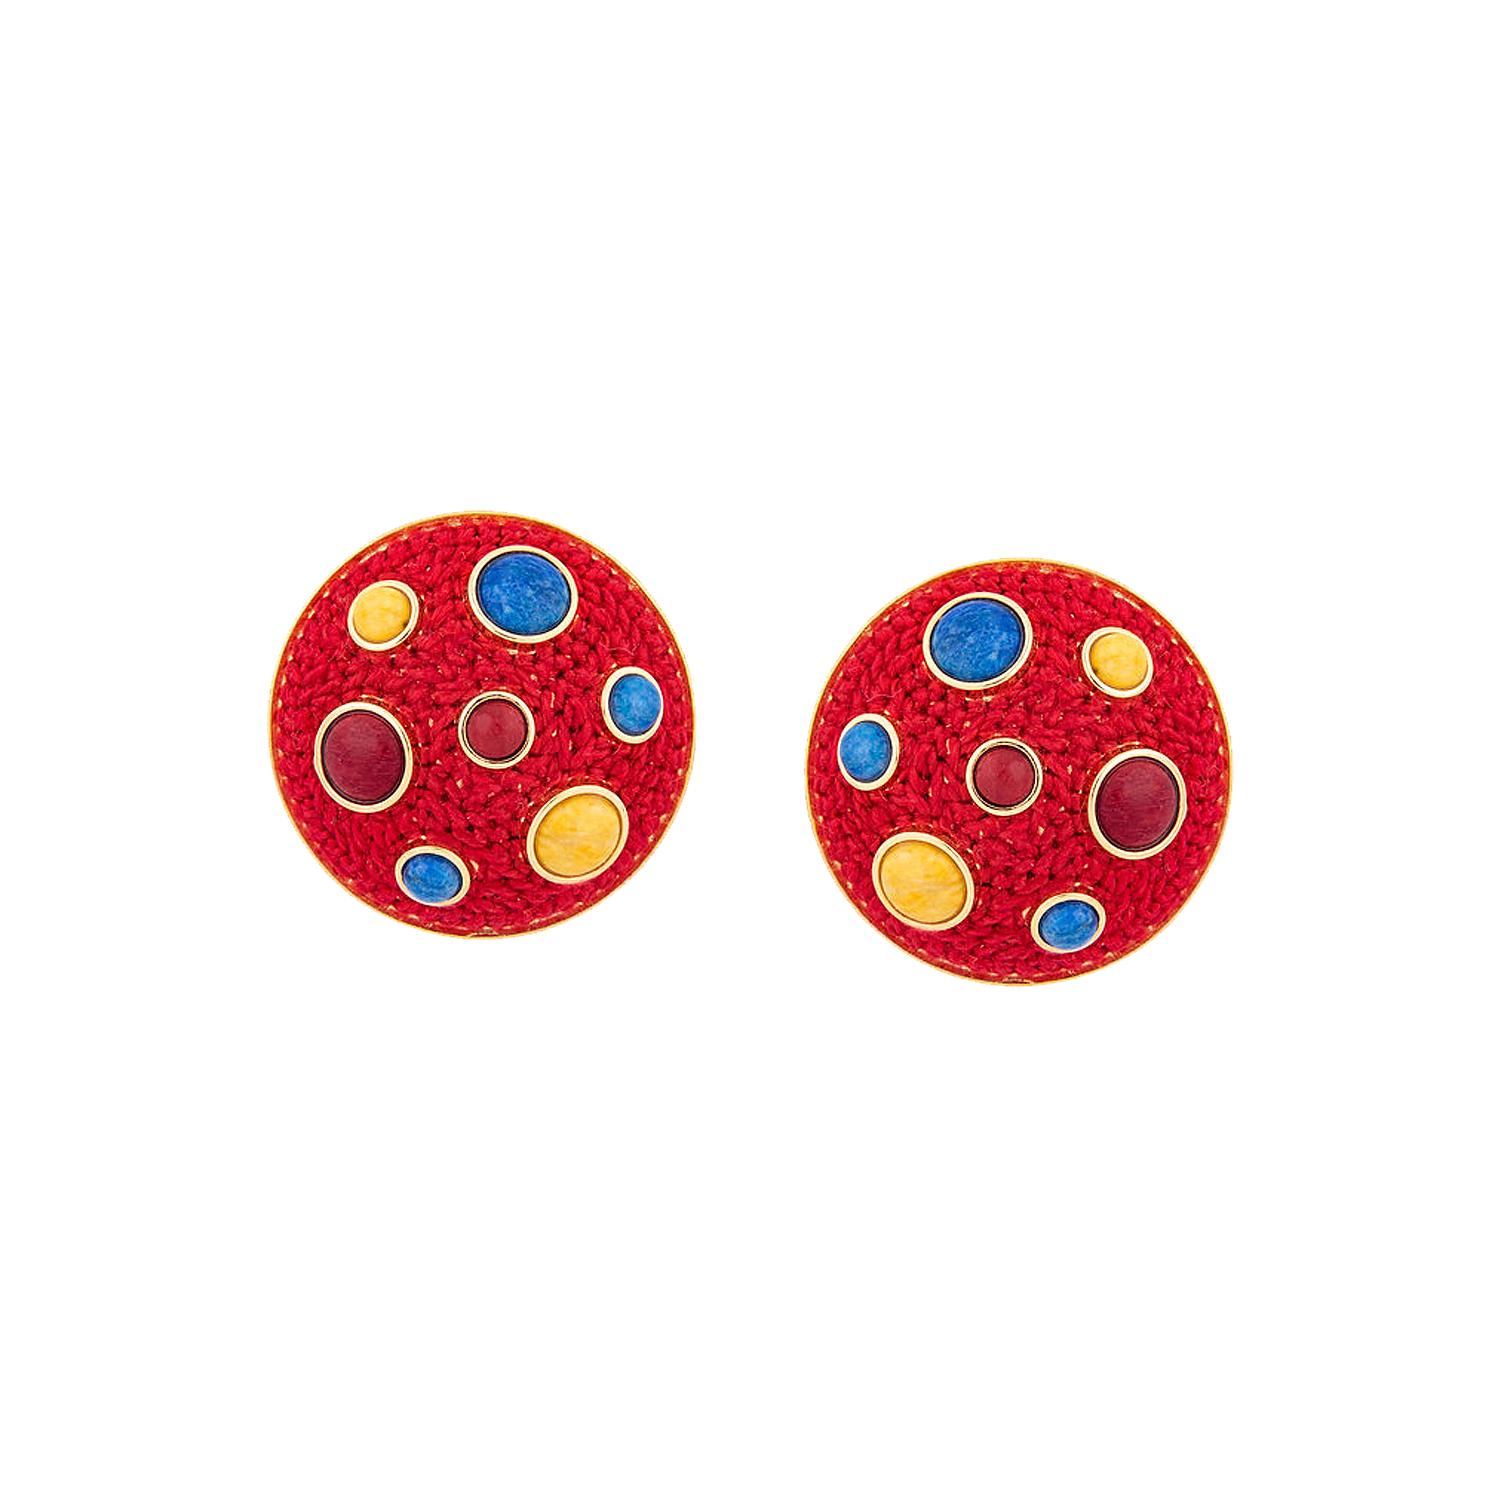 Red Cosmo Earrings